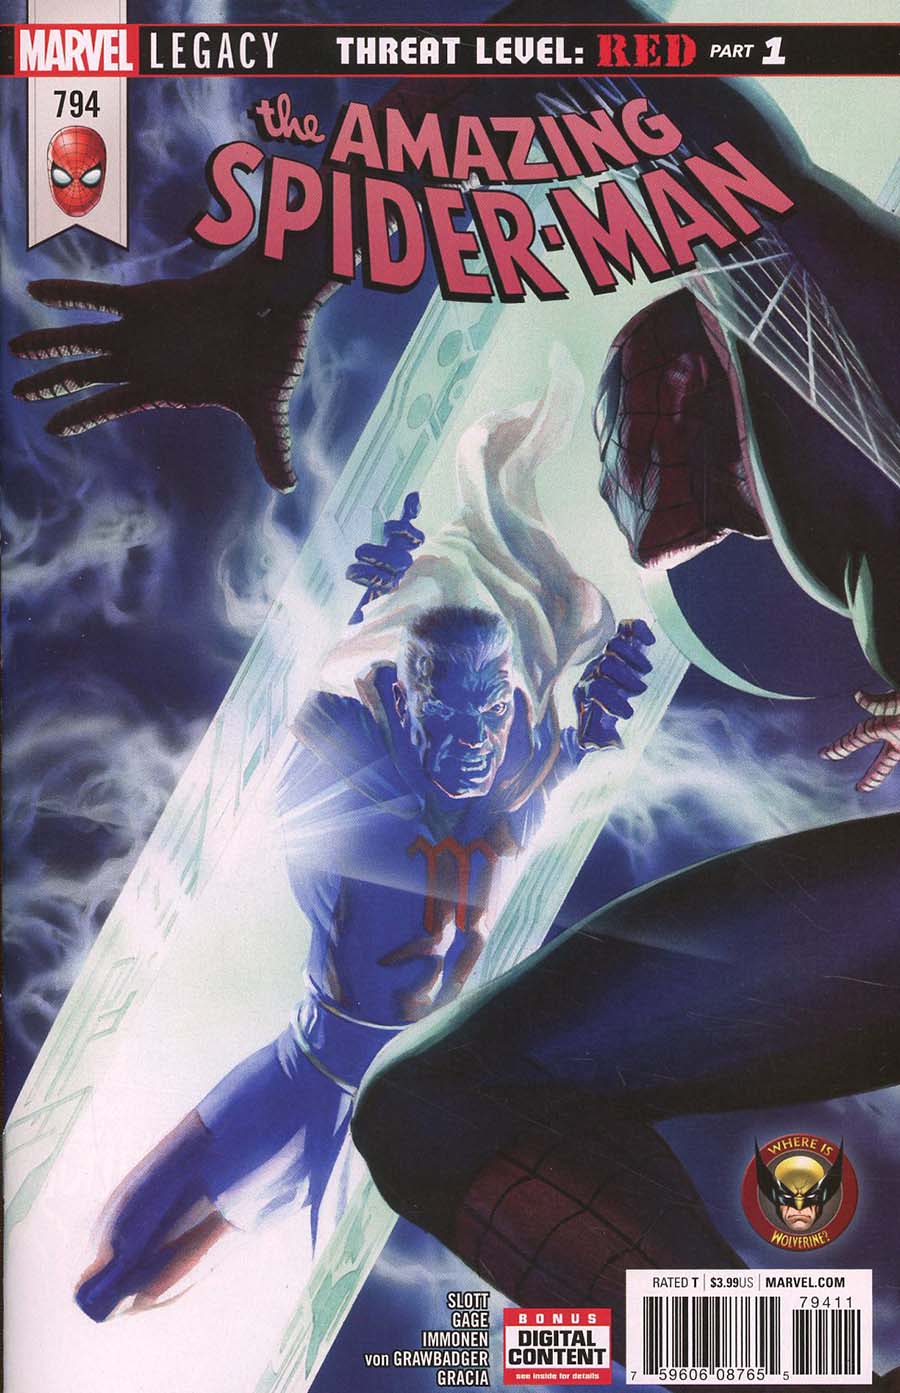 Amazing Spider-Man Vol 4 #794 Cover A 1st Ptg Regular Alex Ross Cover (Marvel Legacy Tie-In)